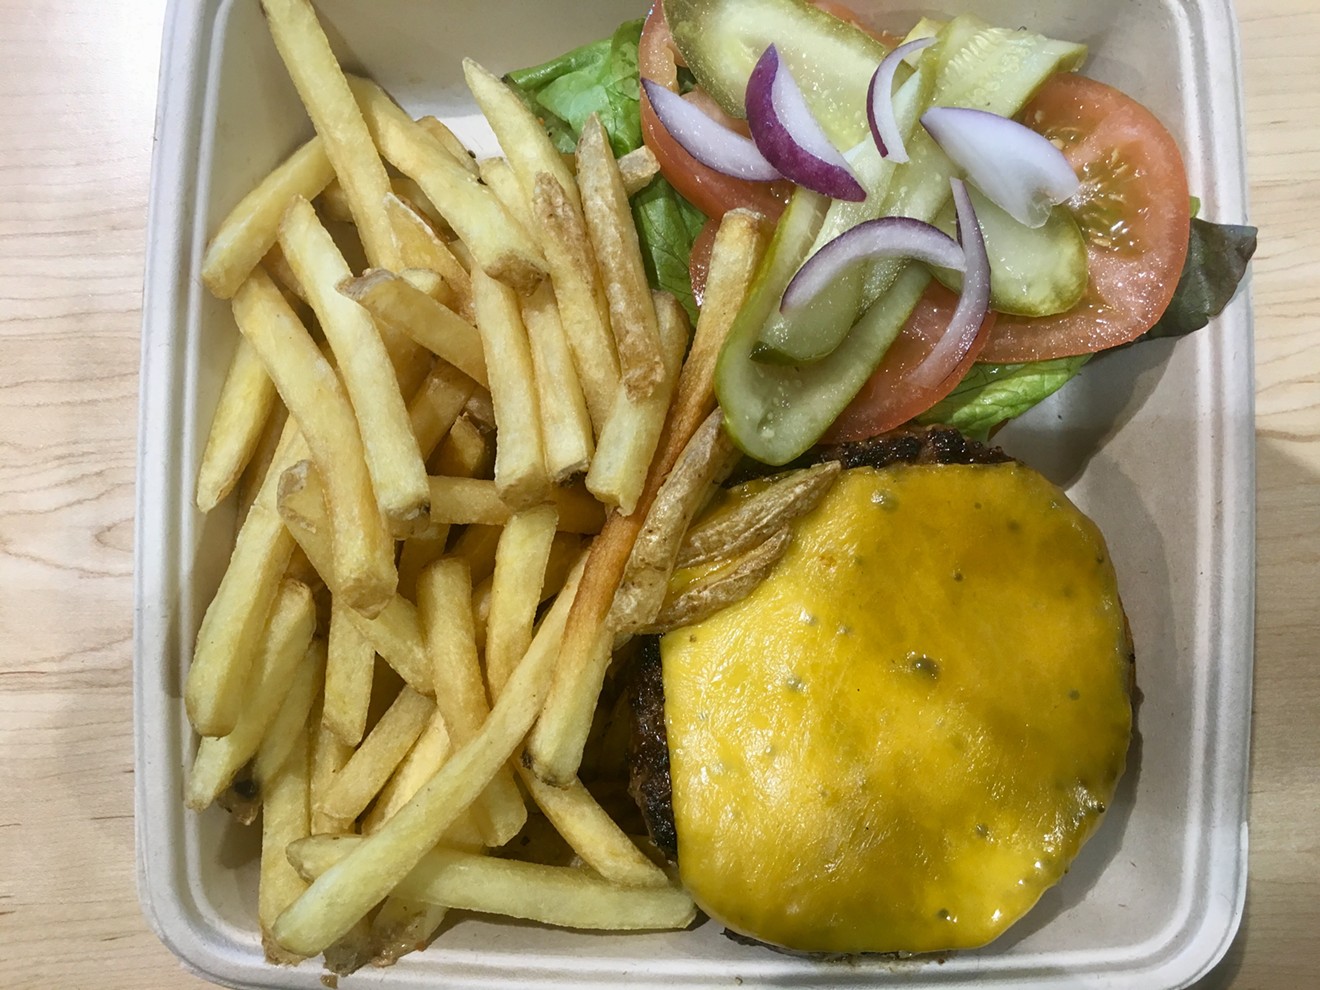 A simple grilled cheeseburger with cheddar for $9.99 at Central Market. No mustard or mayo.